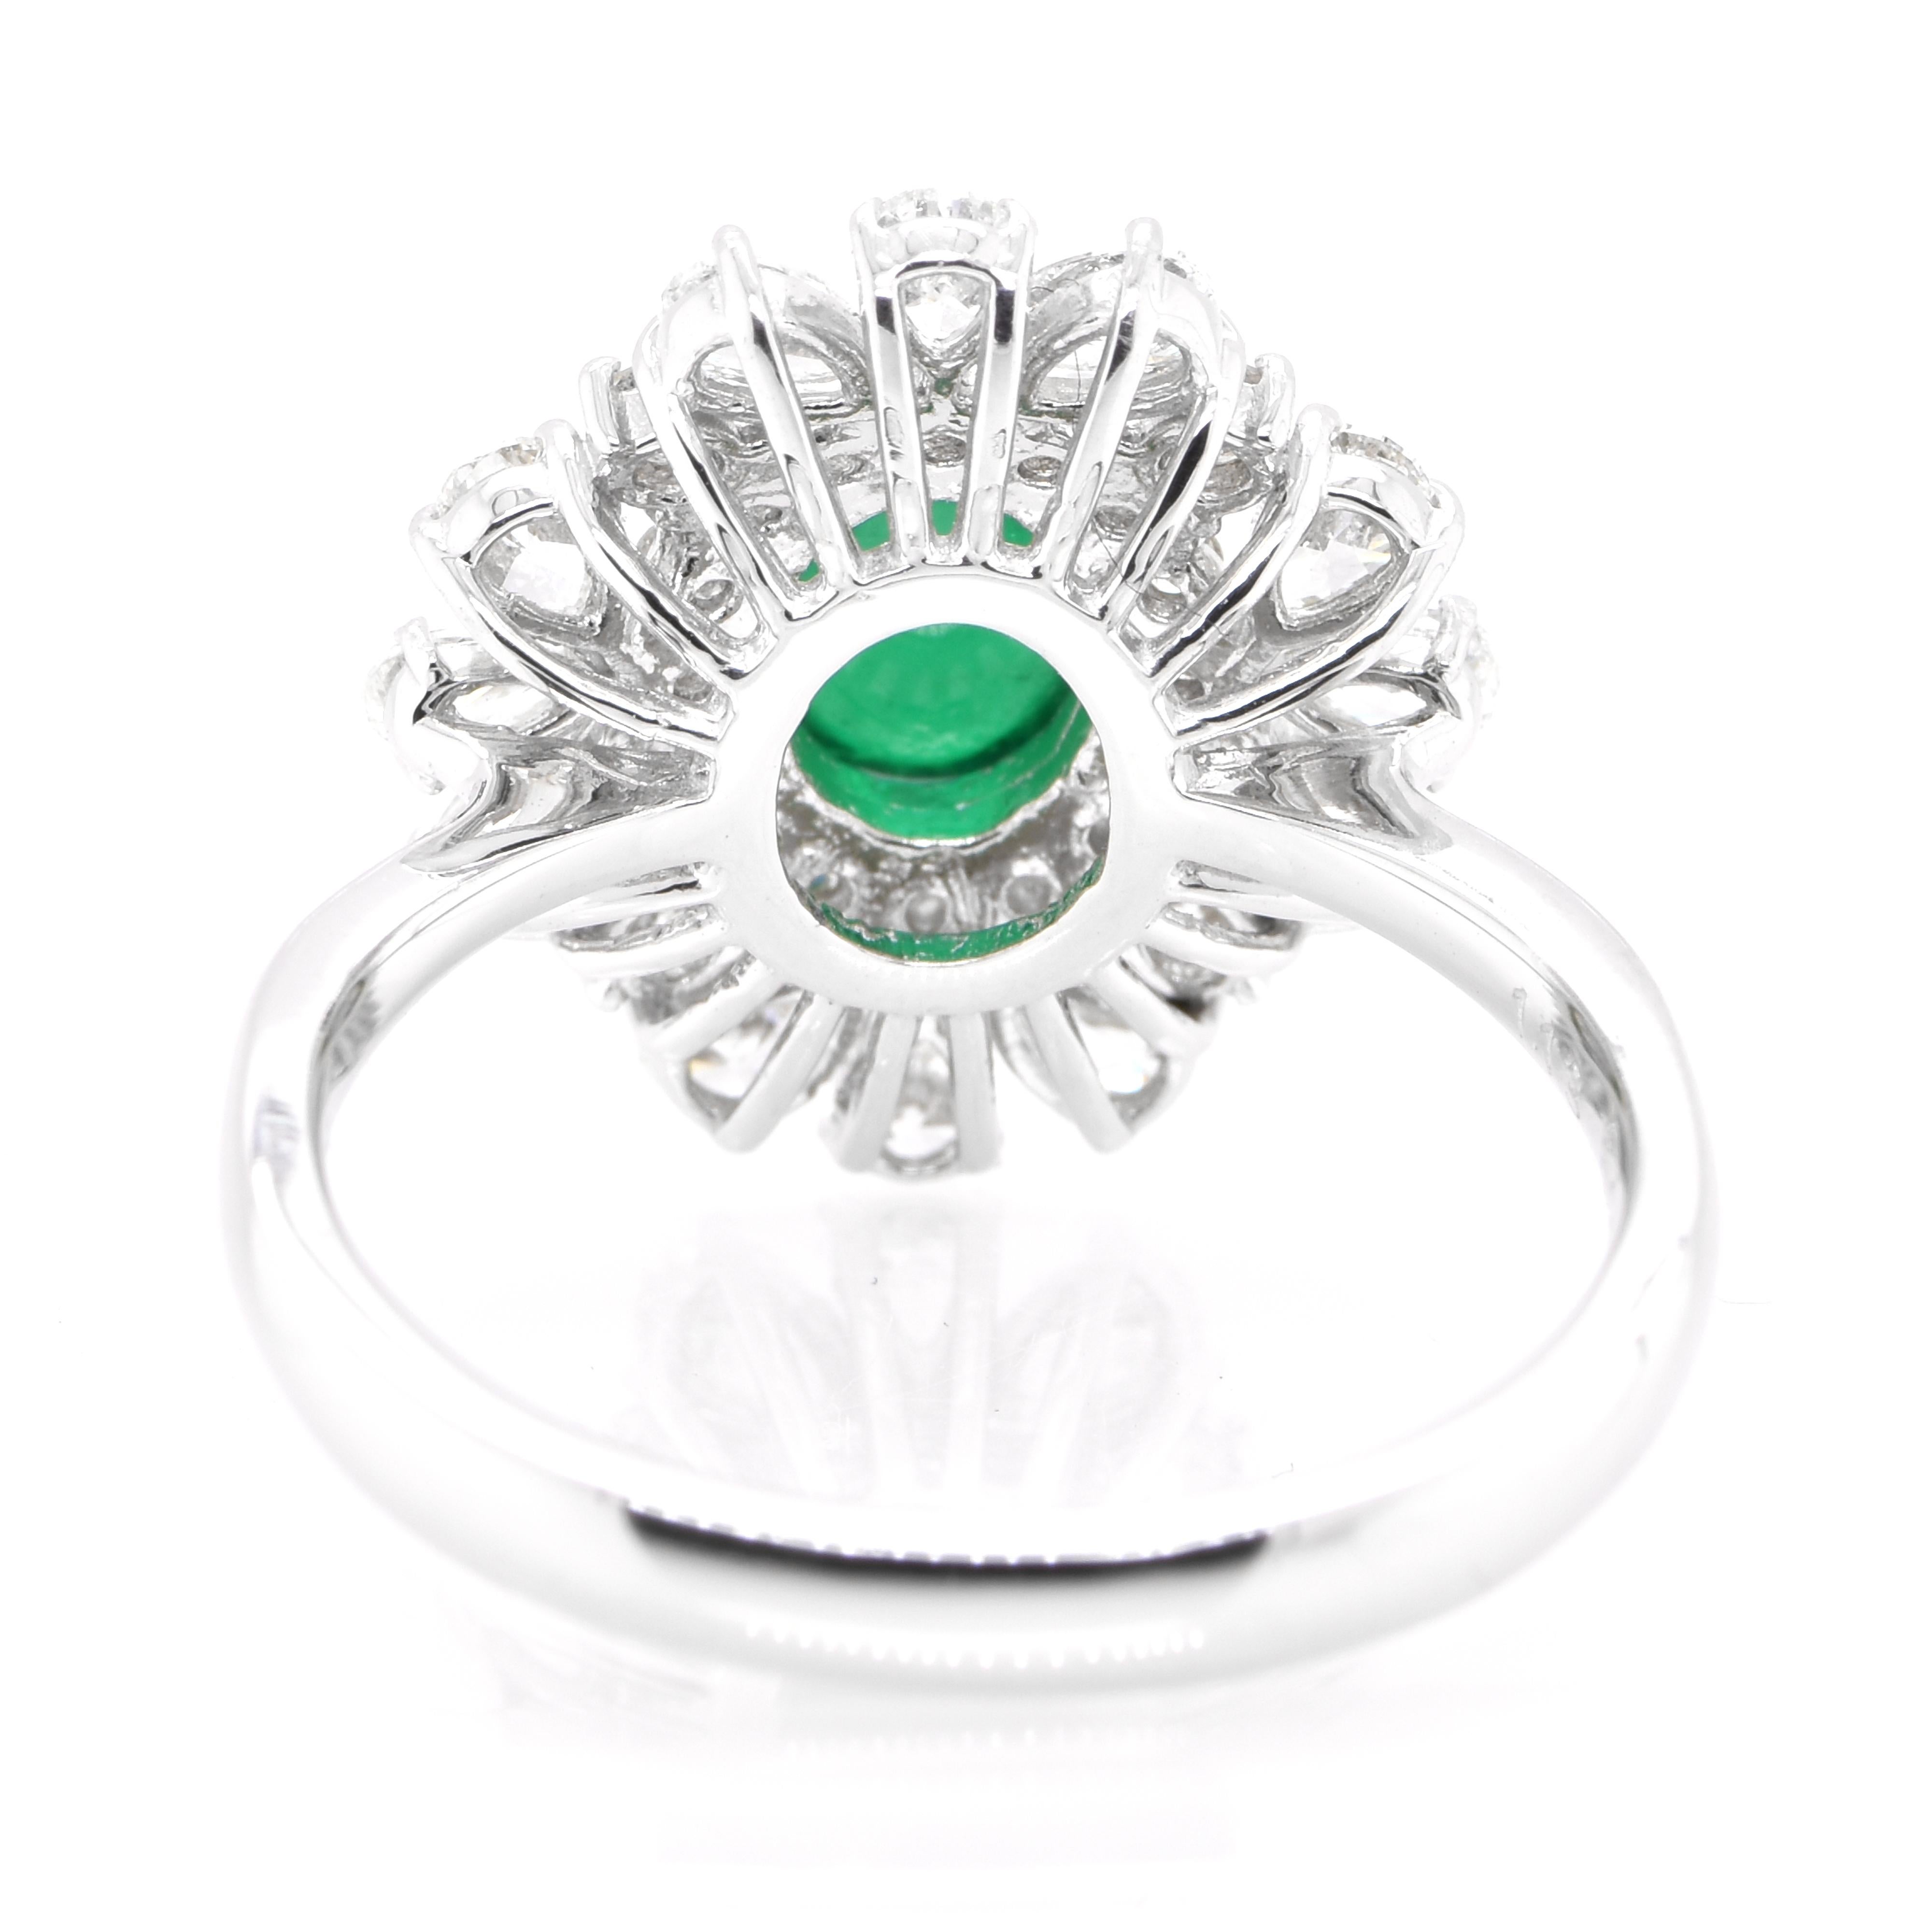 1.13 Carat Natural Emerald Cabochon and Diamond Ring Set in Platinum For Sale 1